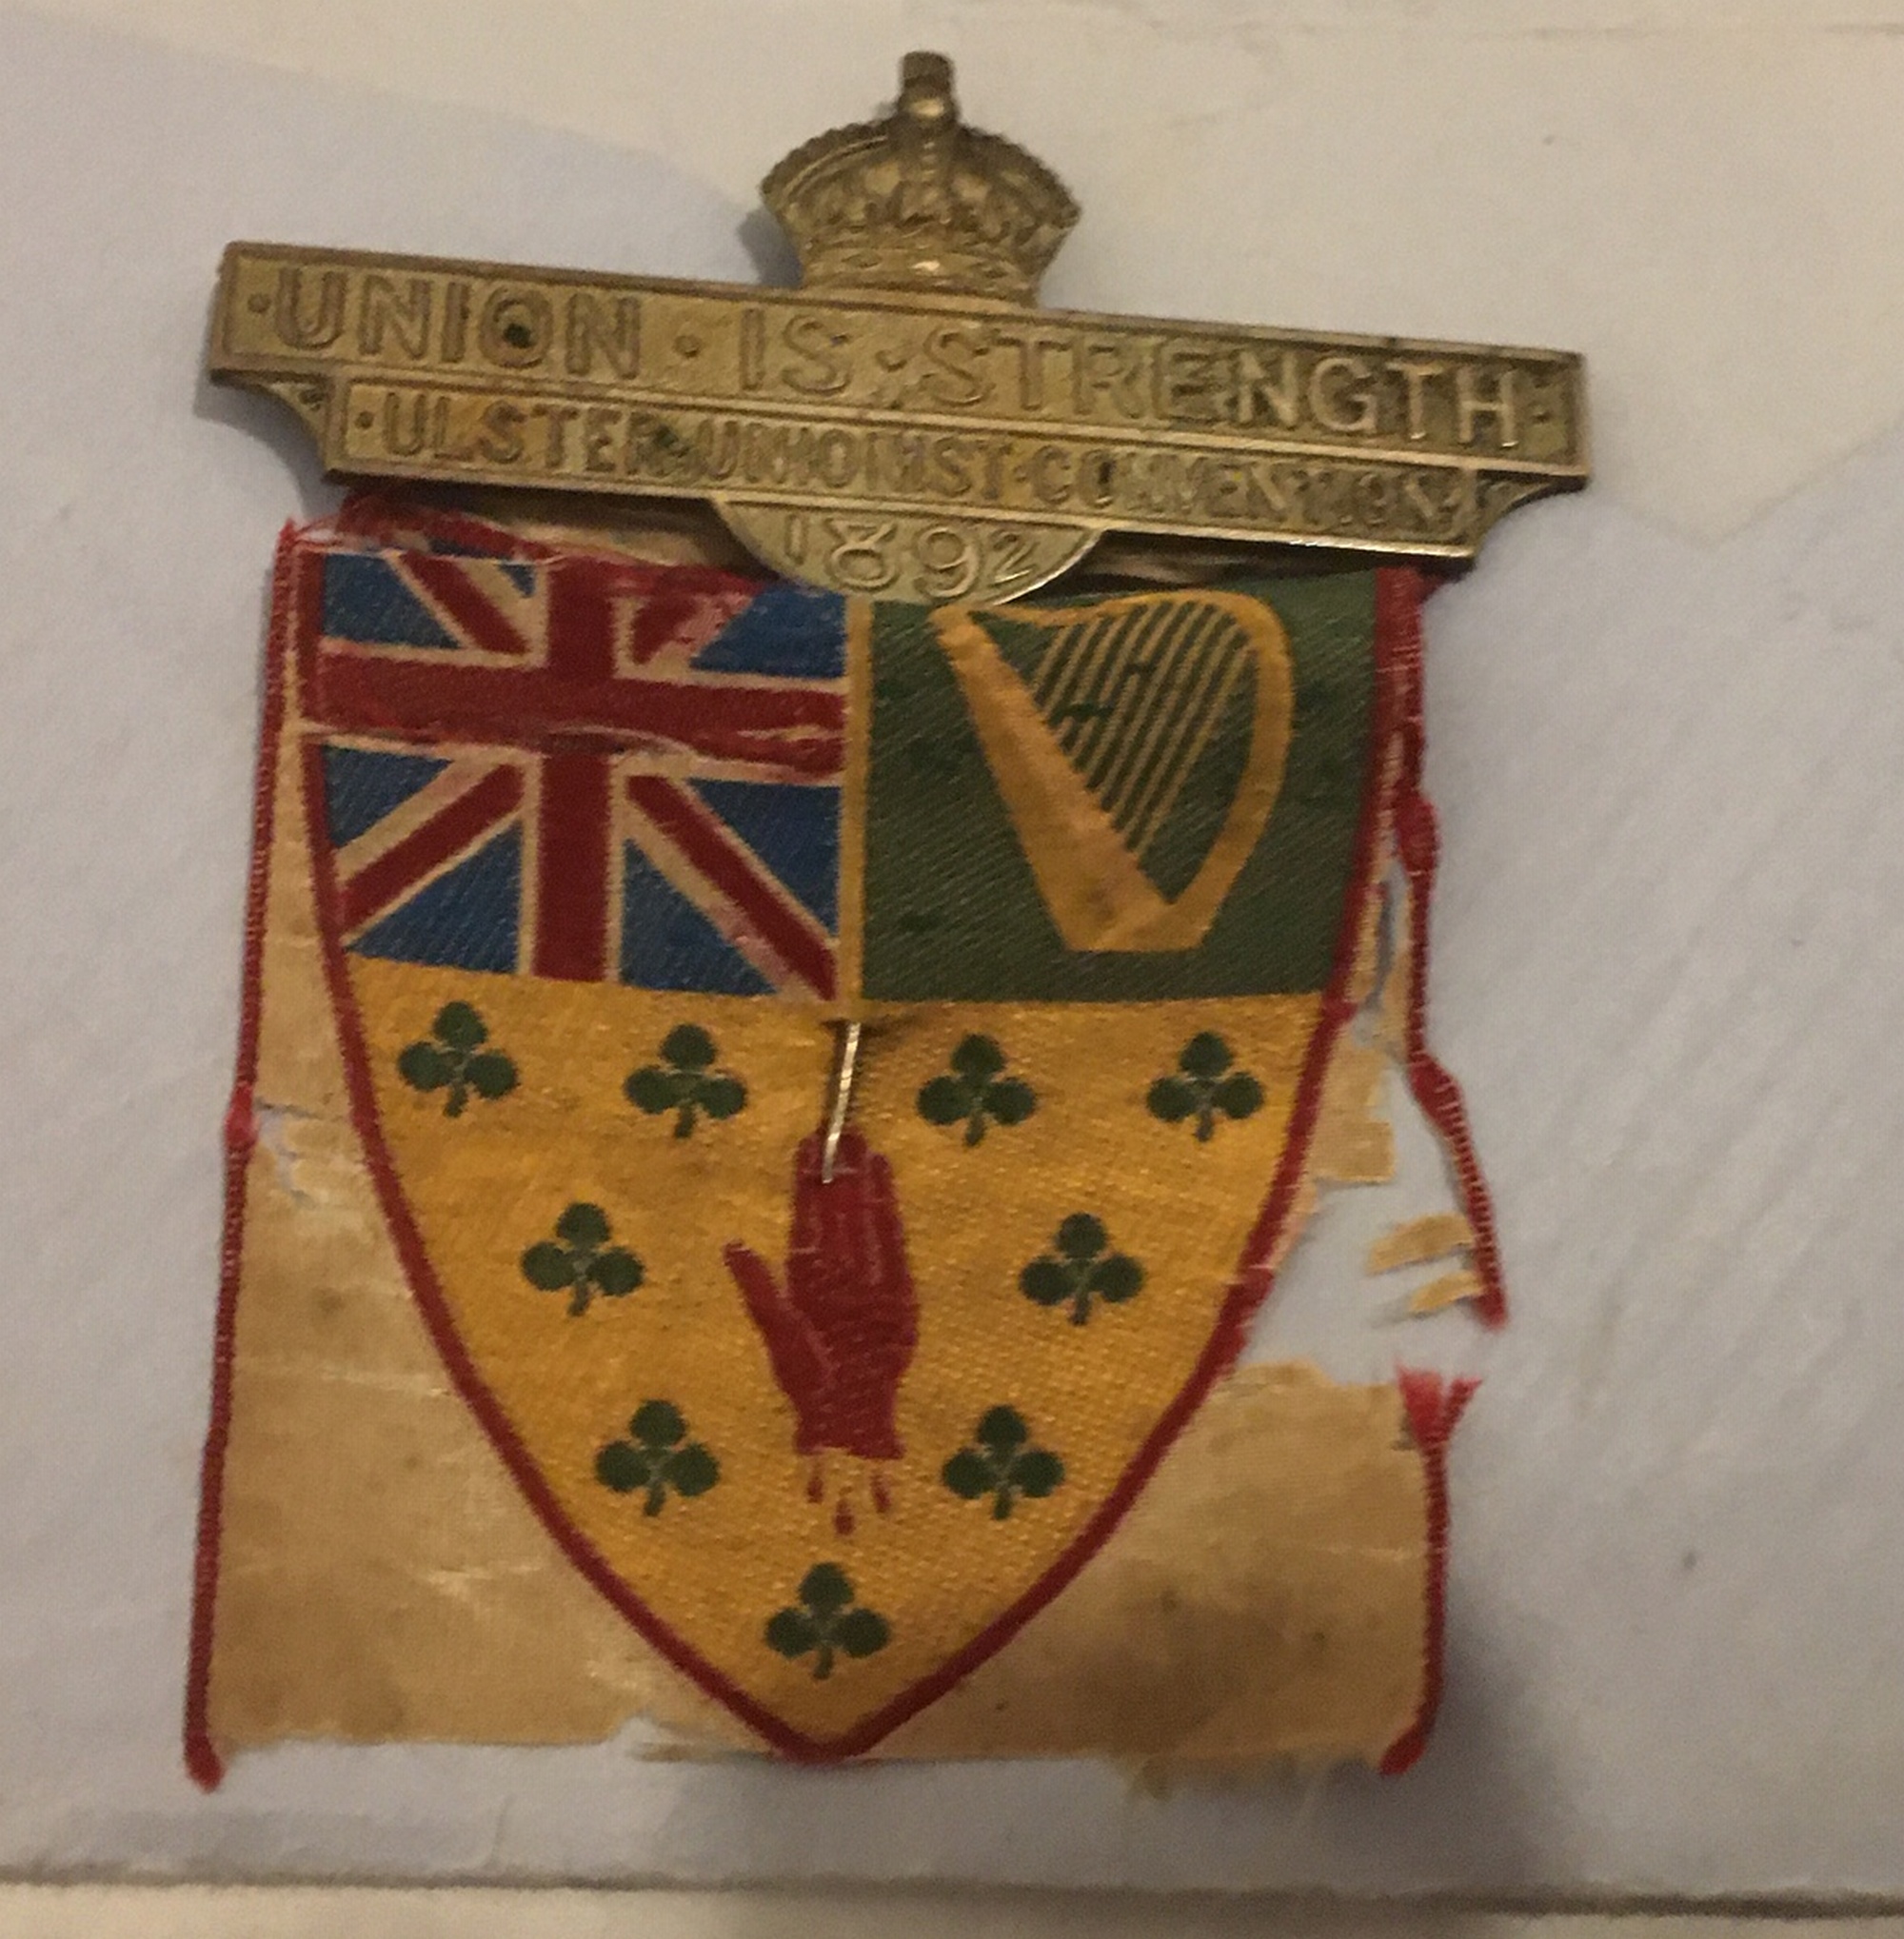 Antique Ulster Unionist Convention 1892 Union is Strength Badge with Silk.